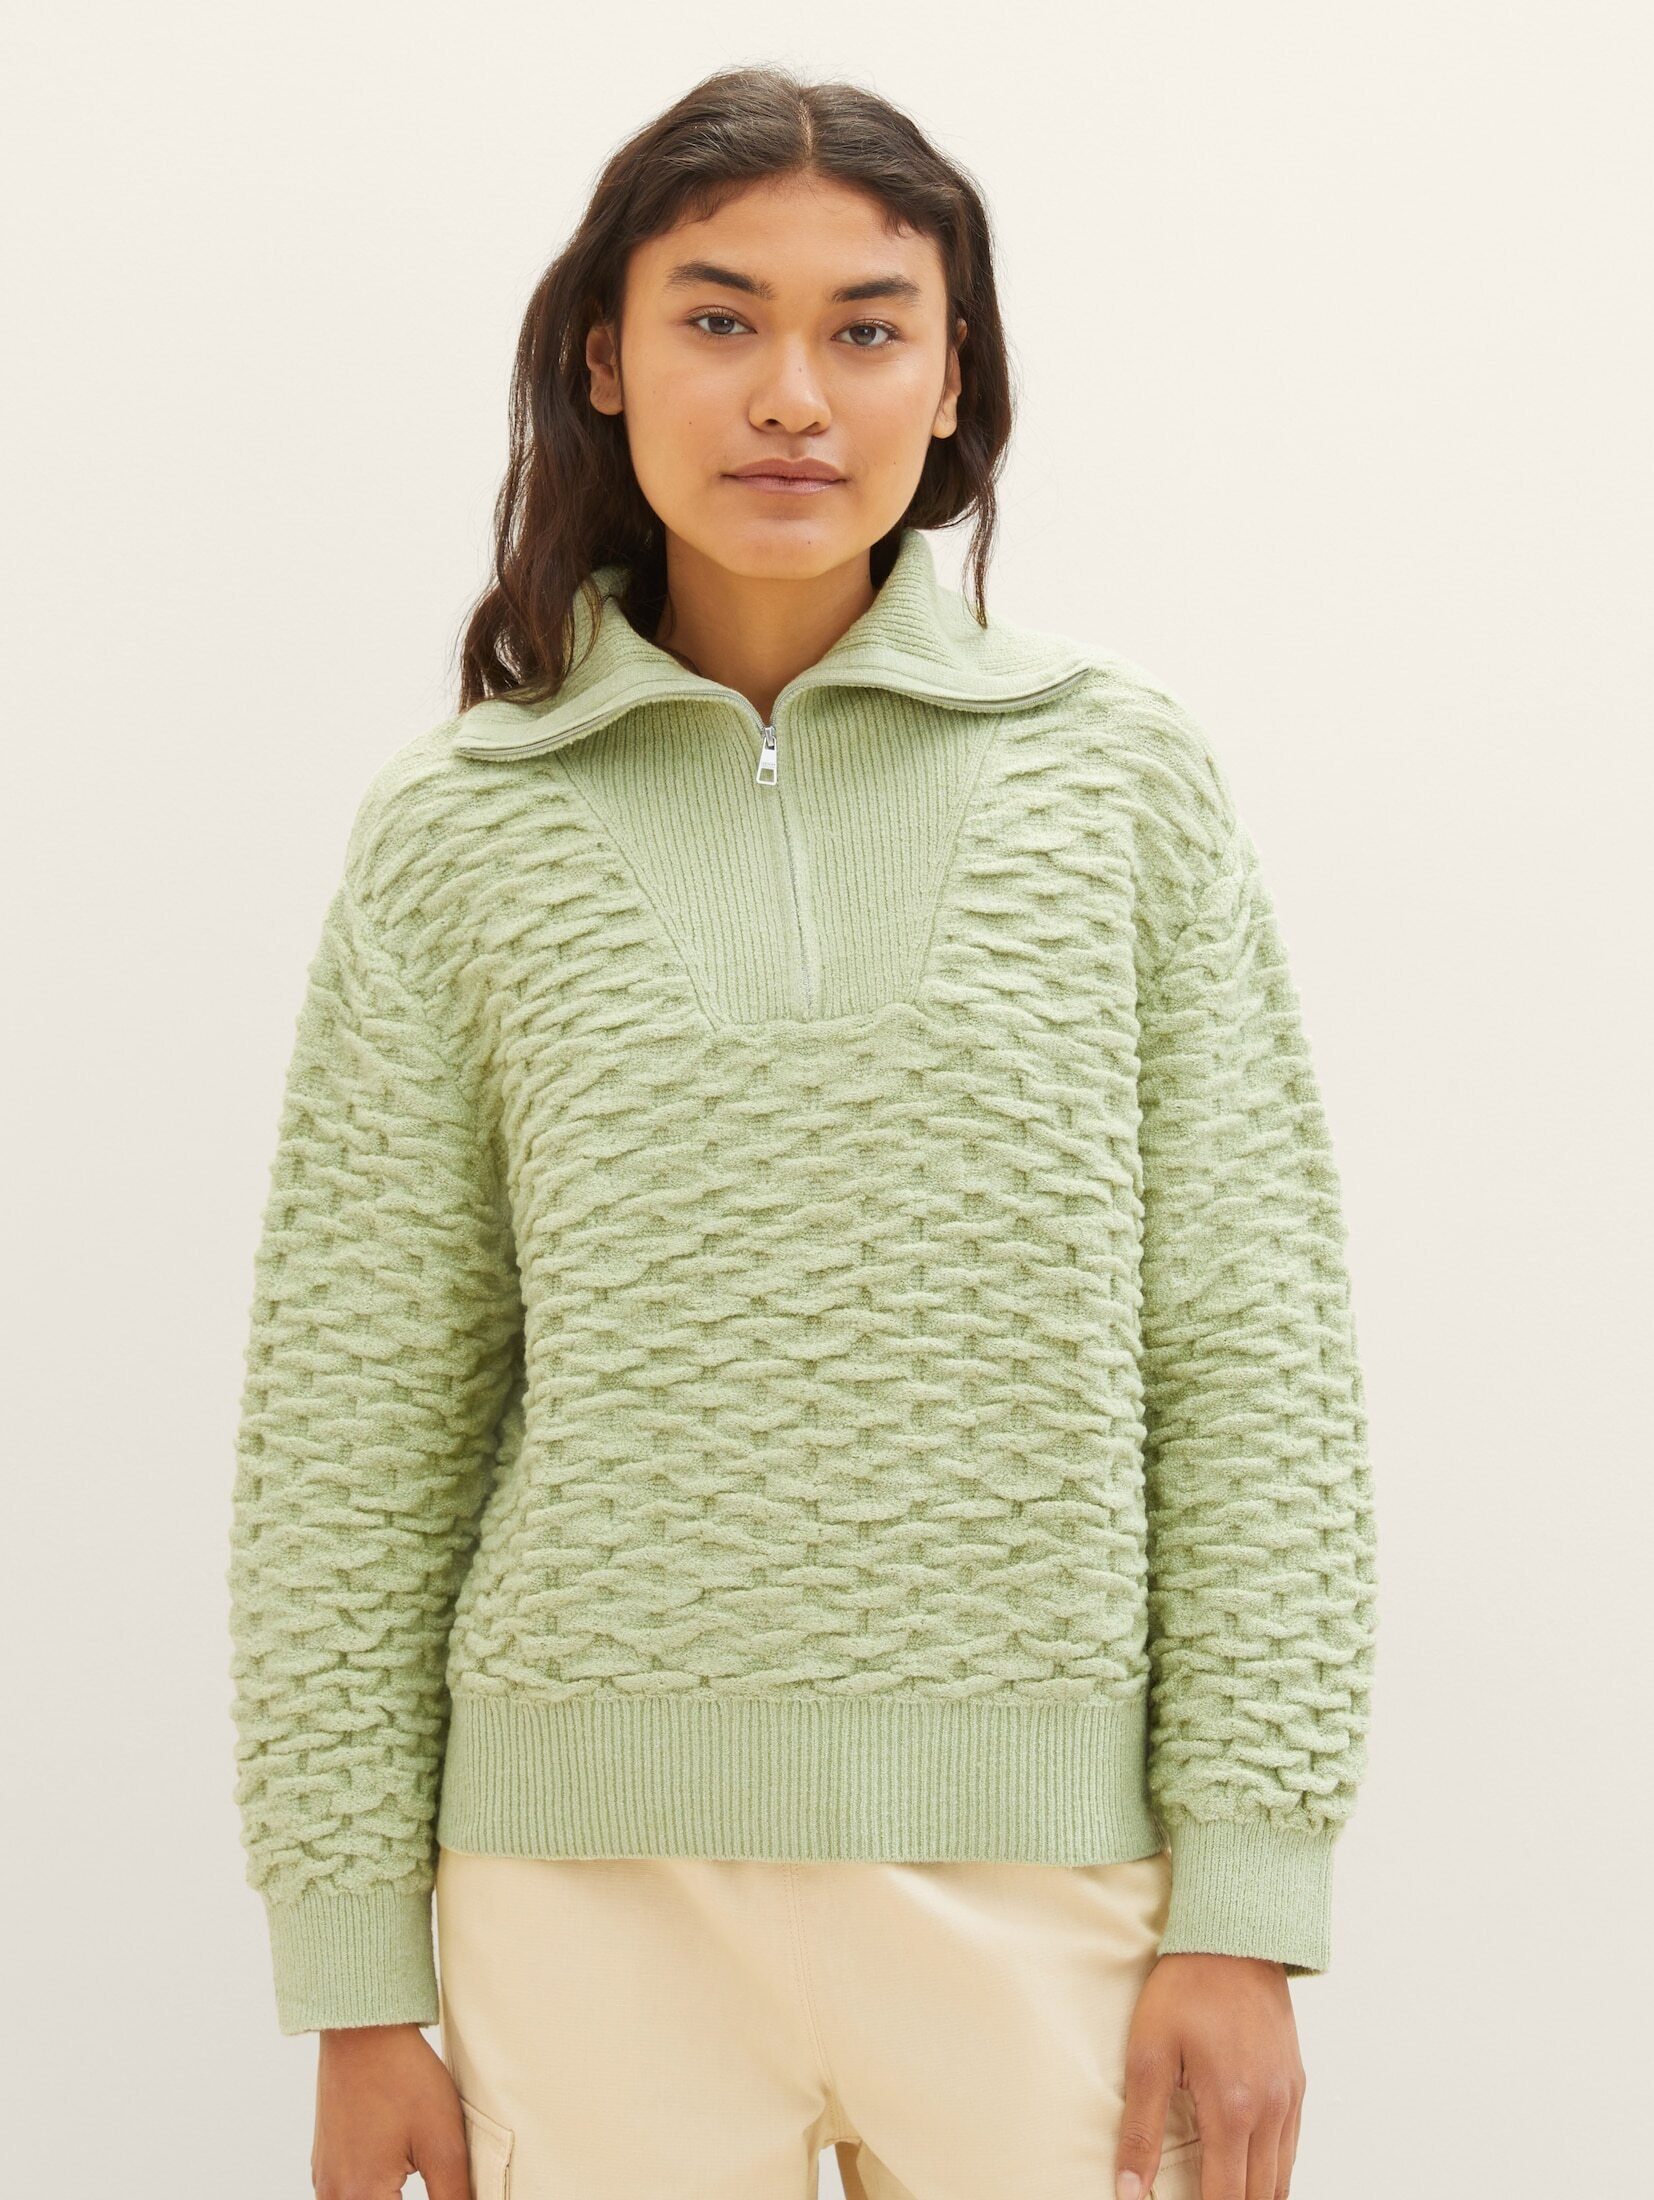 TOM TAILOR Denim Strickpullover Troyer Pullover mit recyceltem Polyester dusty pear green